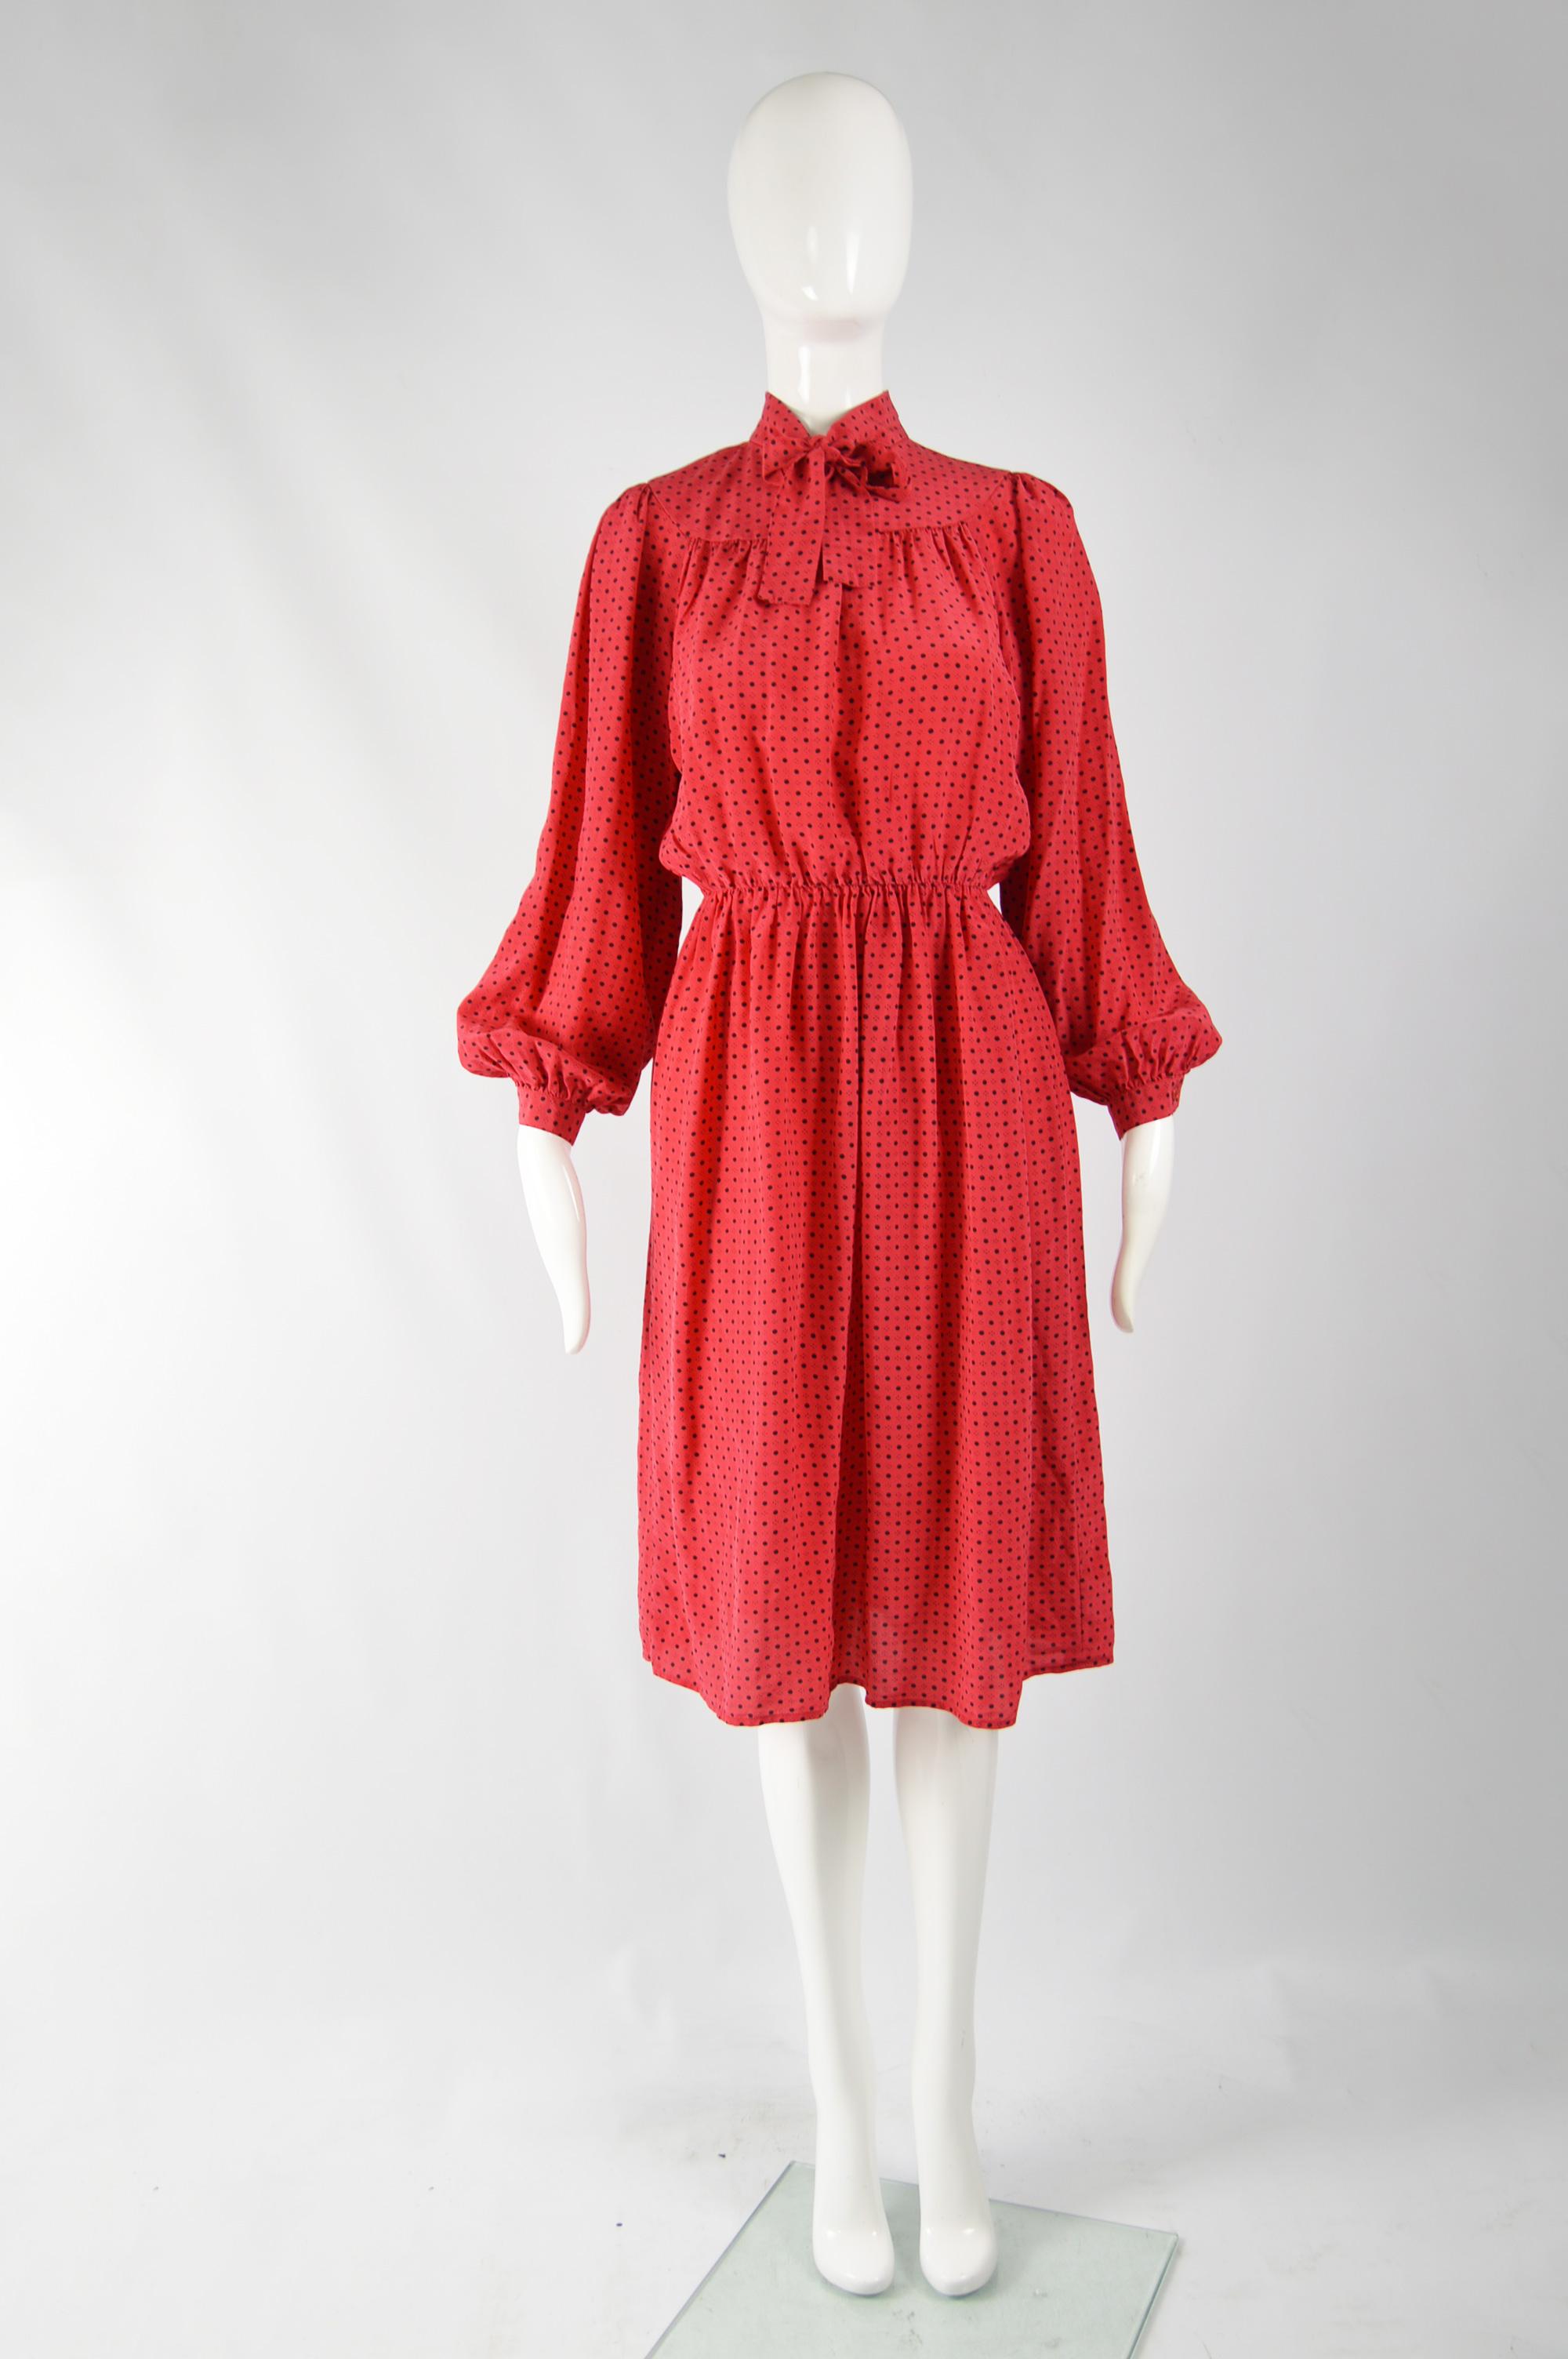 A pretty vintage womens Oscar de la Renta blouson dress from the 80s in a polka dot printed red silk with puff bishop sleeves, a high neck and a pussybow detail. 

Size: fits roughly like a modern women's UK 8/ US 4/ EU 36. Please check